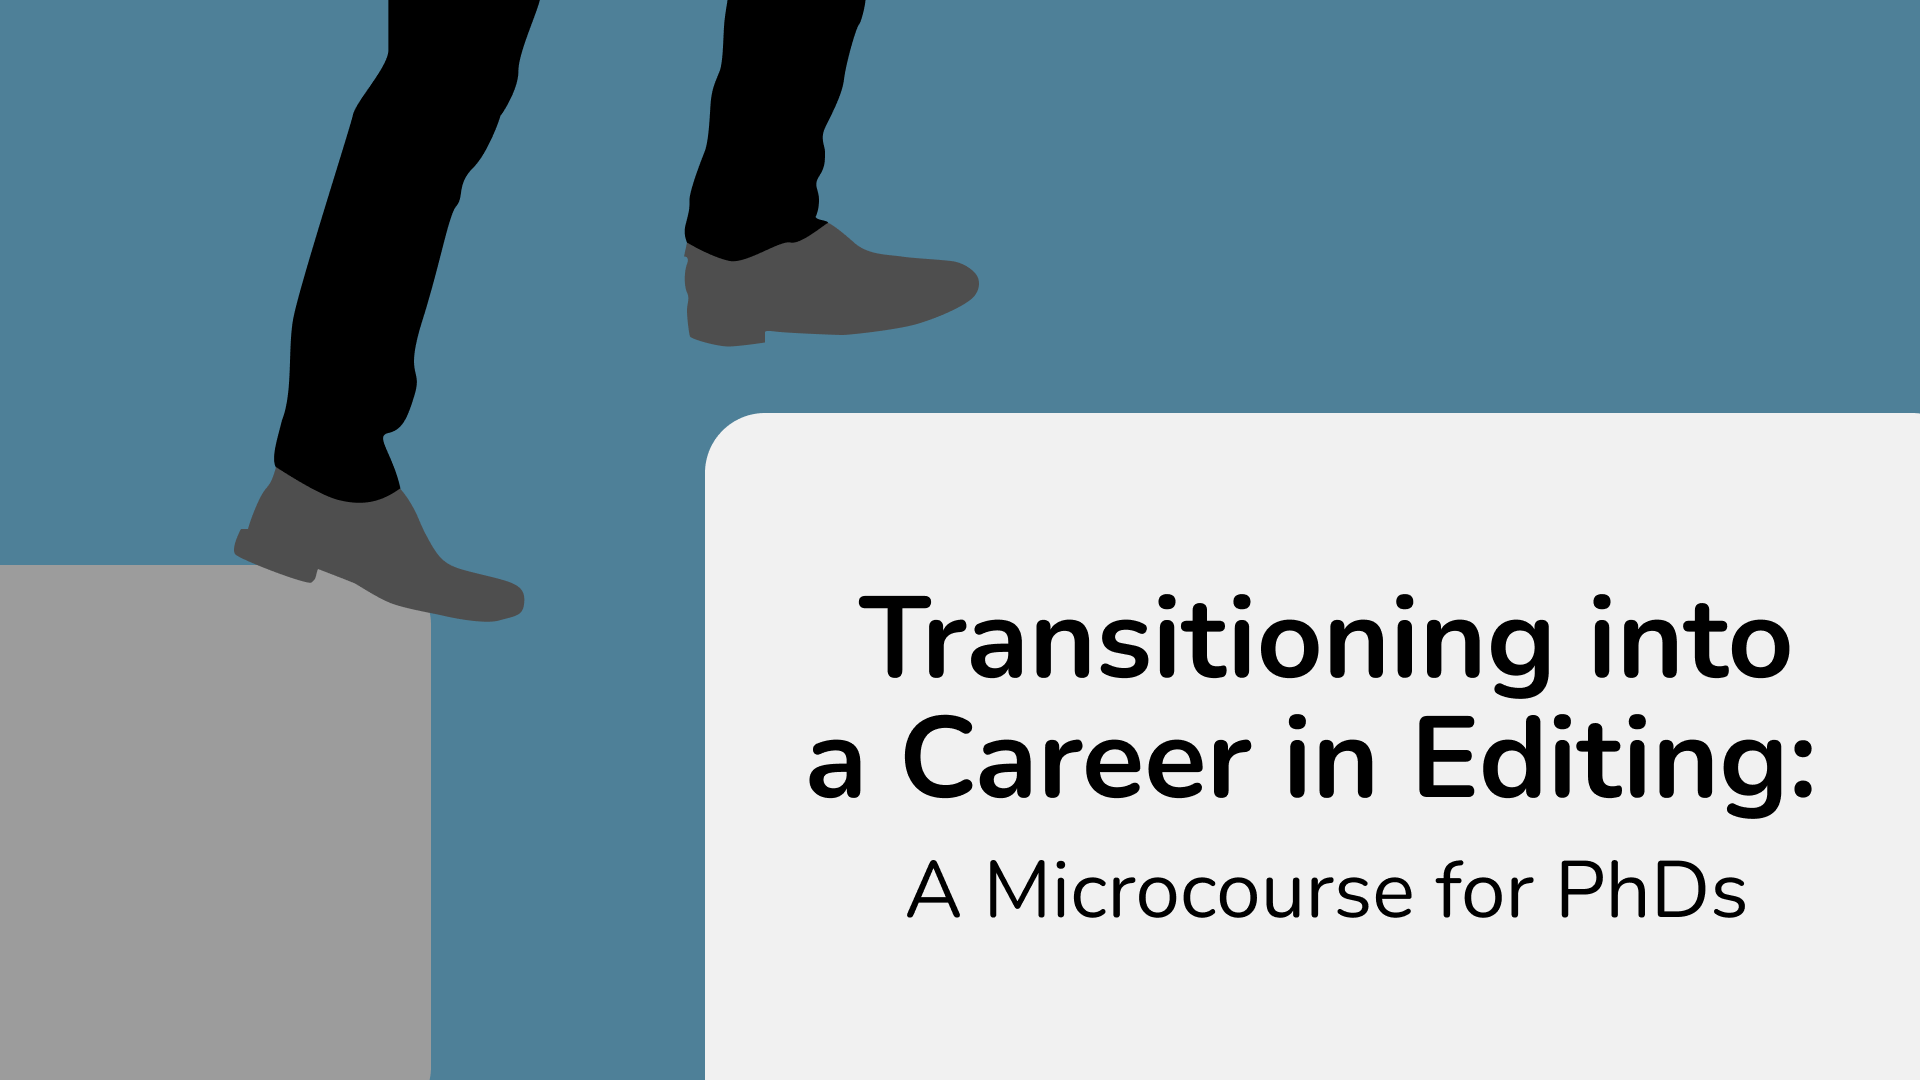 Transitioning into a Career in Editing: A Microcourse for PhDs